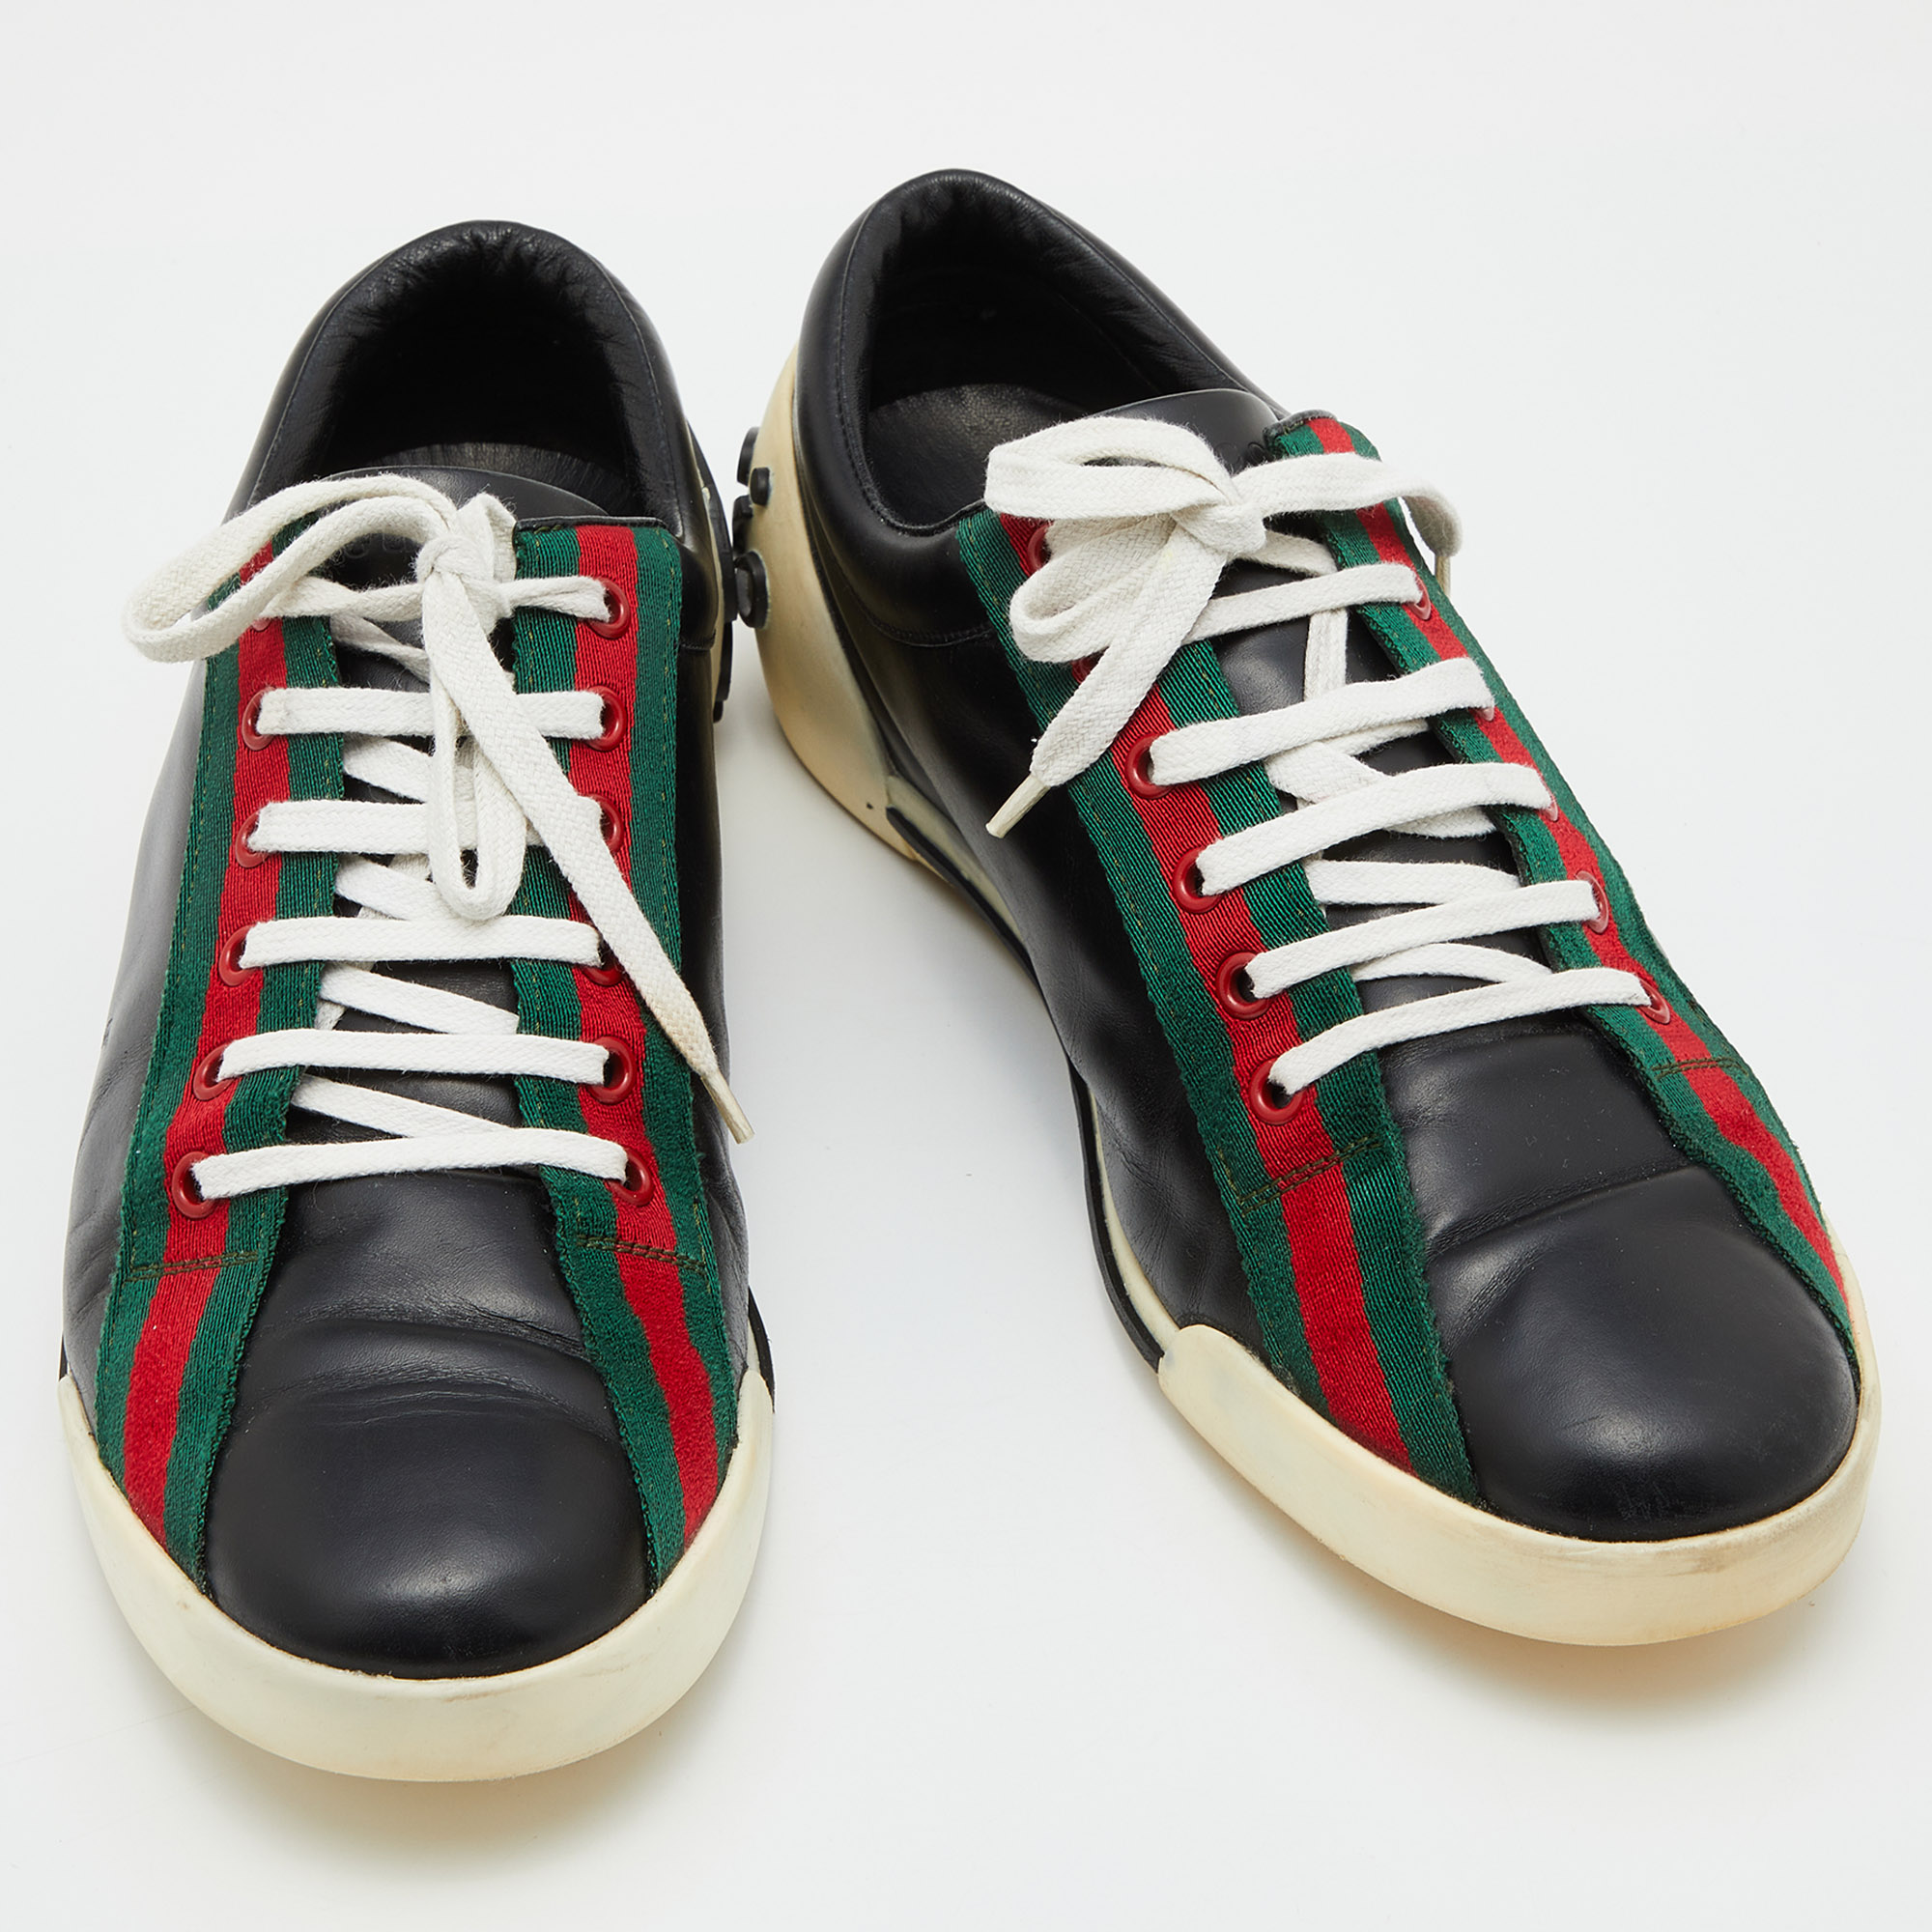 Gucci Black Leather Web Detail Low Top Sneakers Size 43